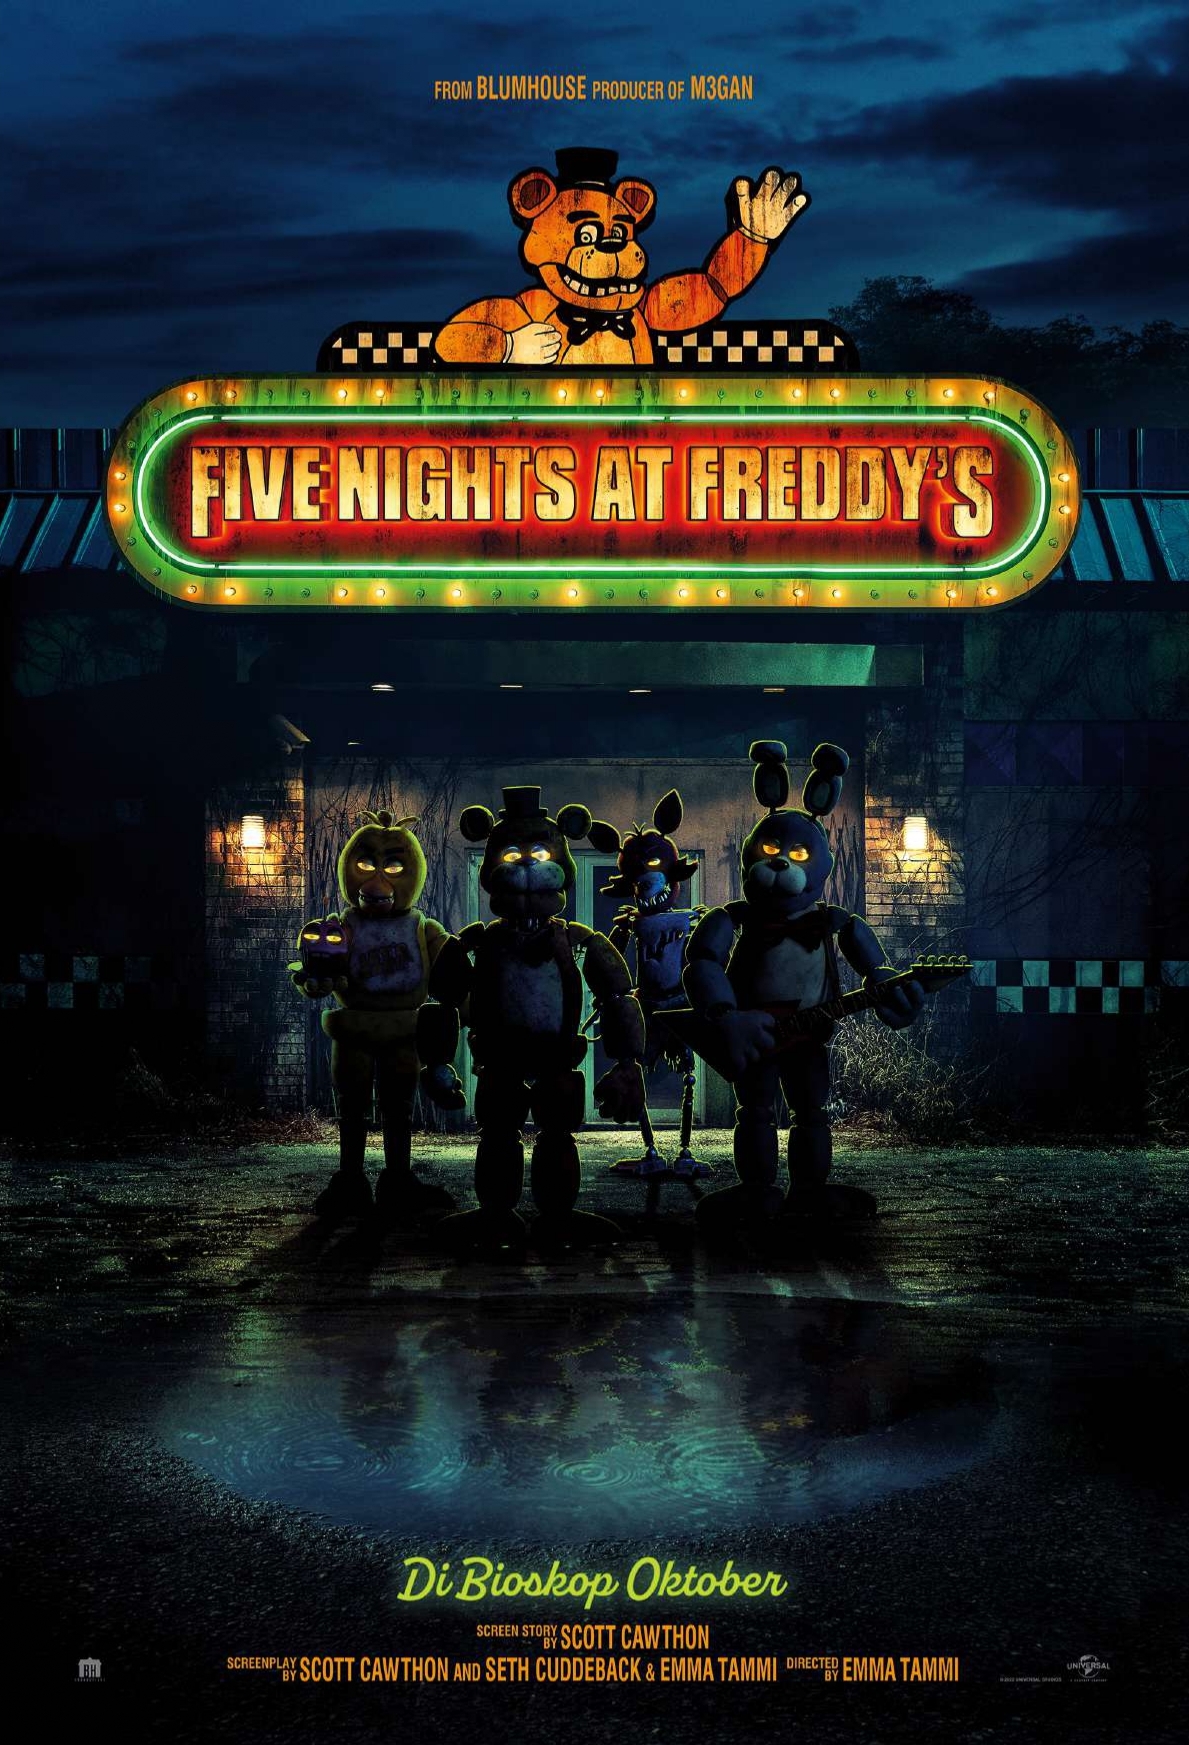 ako si christian recommends picture of five nights at freddys pic